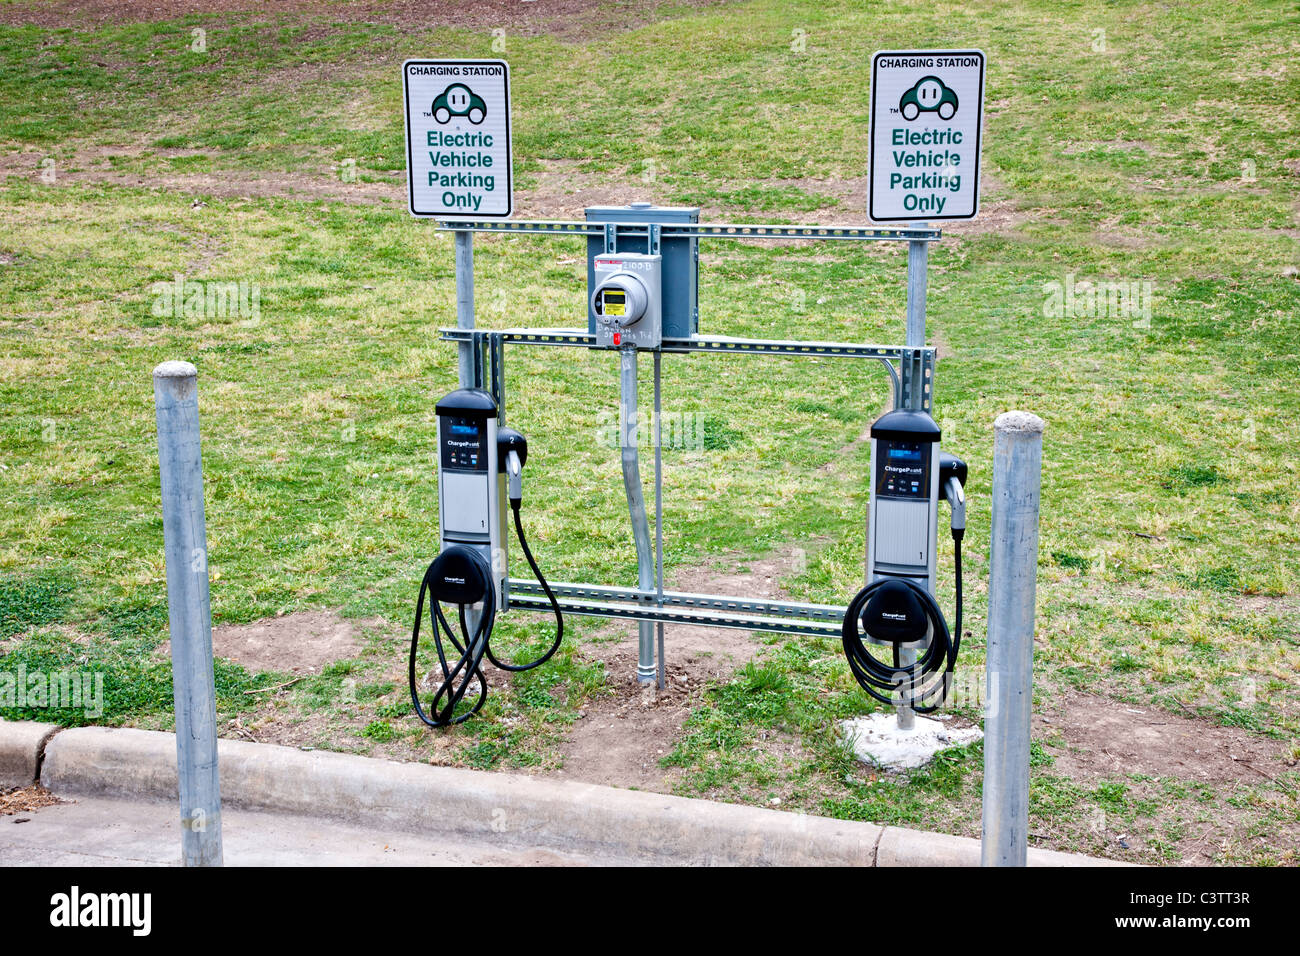 Electric Vehicle charging station, Stock Photo